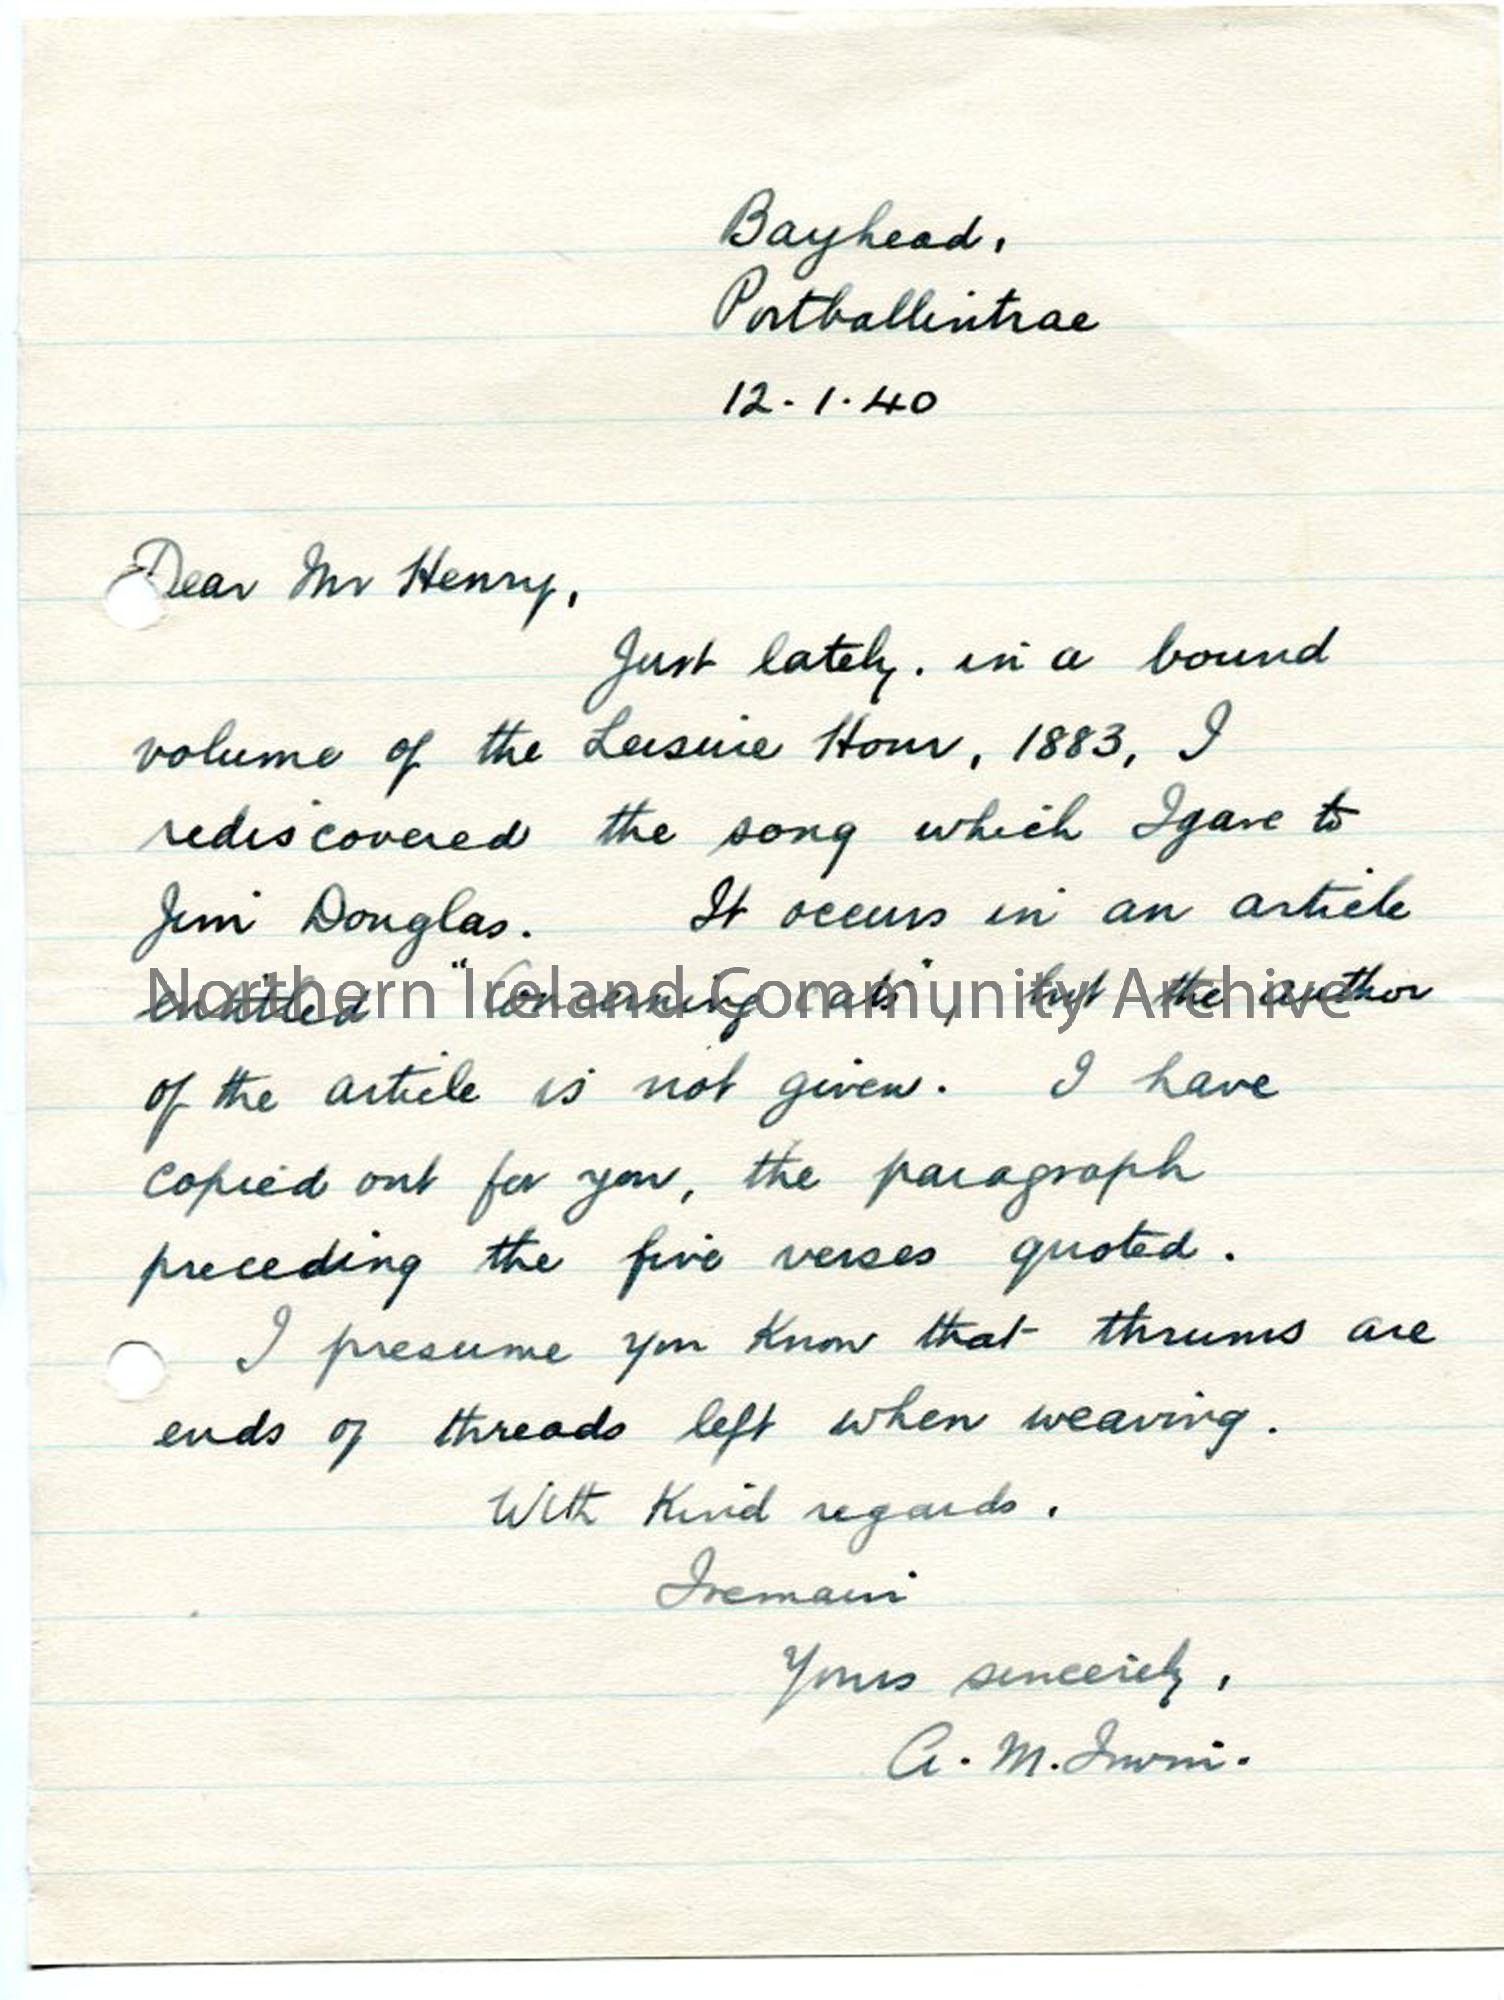 Page one: letter from A M Irwin, 12.1.1940